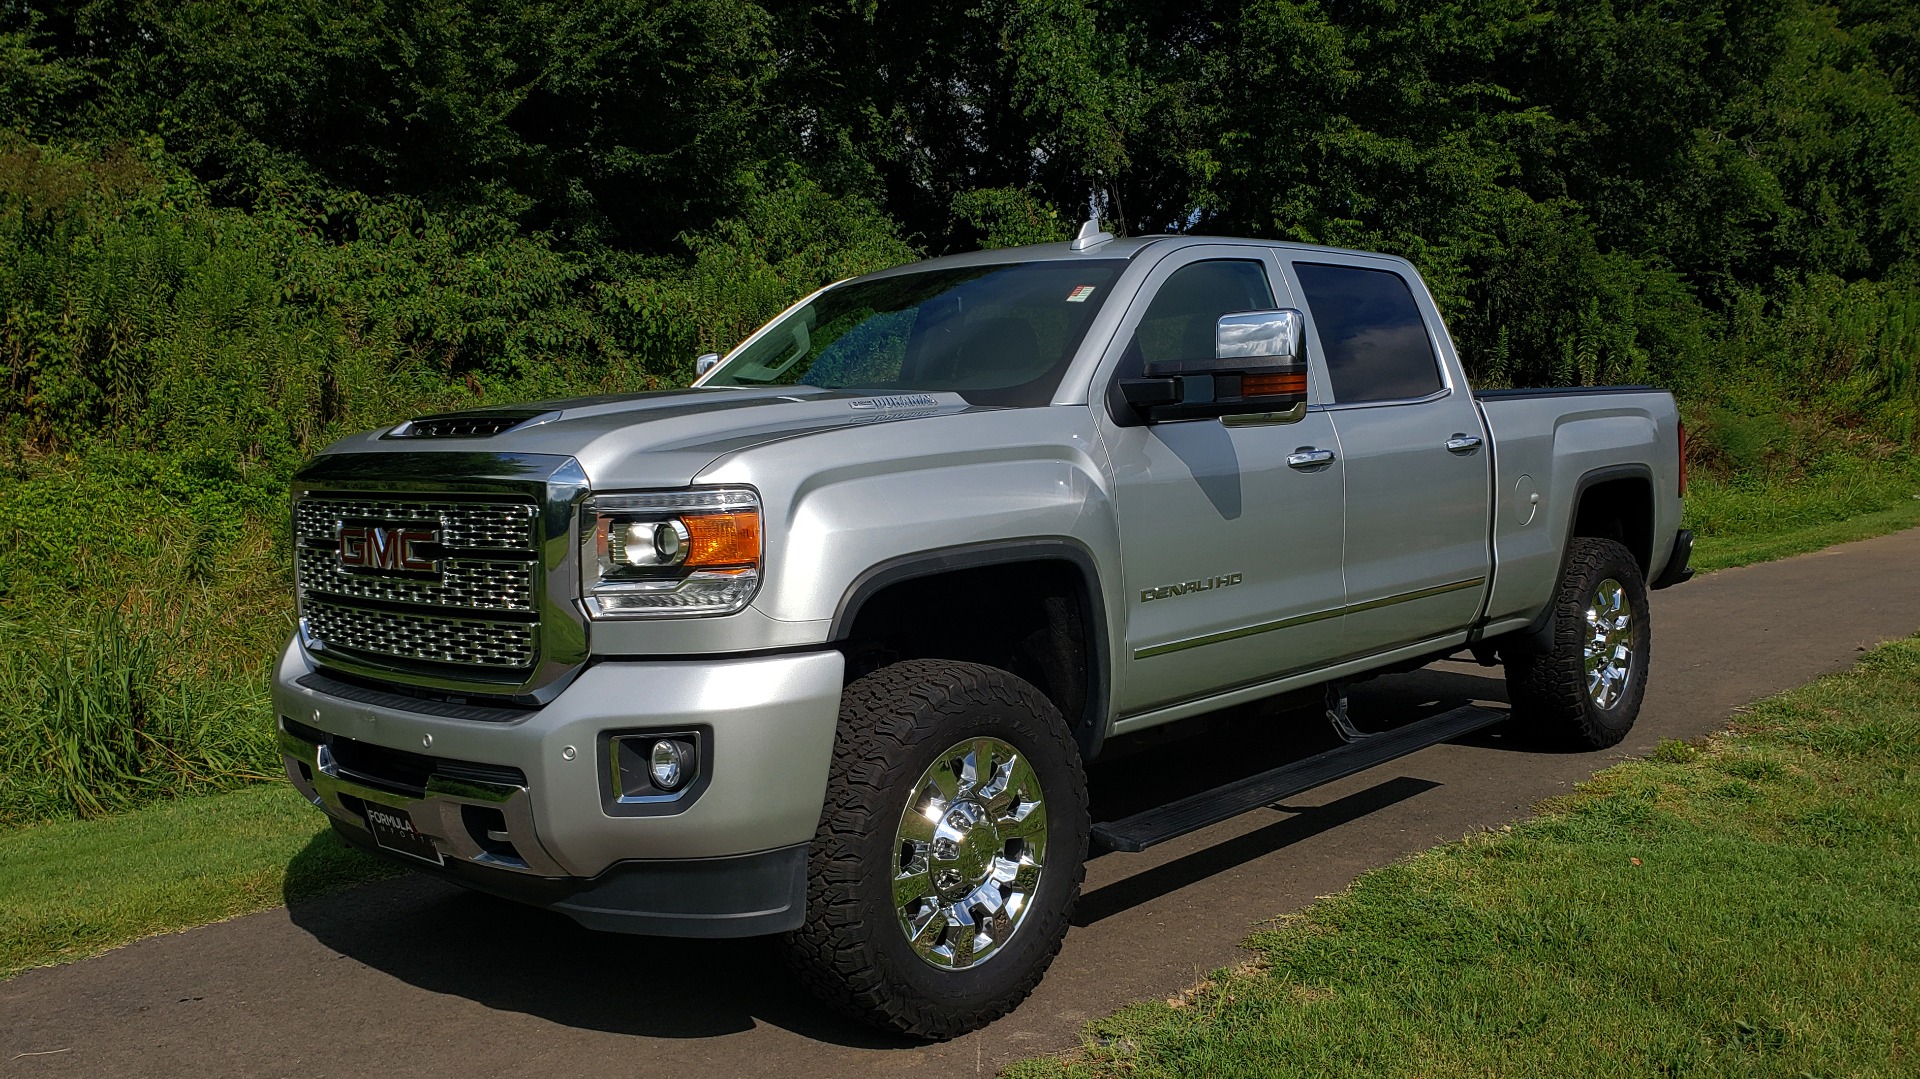 Used 2018 GMC SIERRA 2500HD DENALI 4WD / 6.6L DURAMAX / NAV / SUNROOF / BOSE / REARVIEW for sale Sold at Formula Imports in Charlotte NC 28227 2